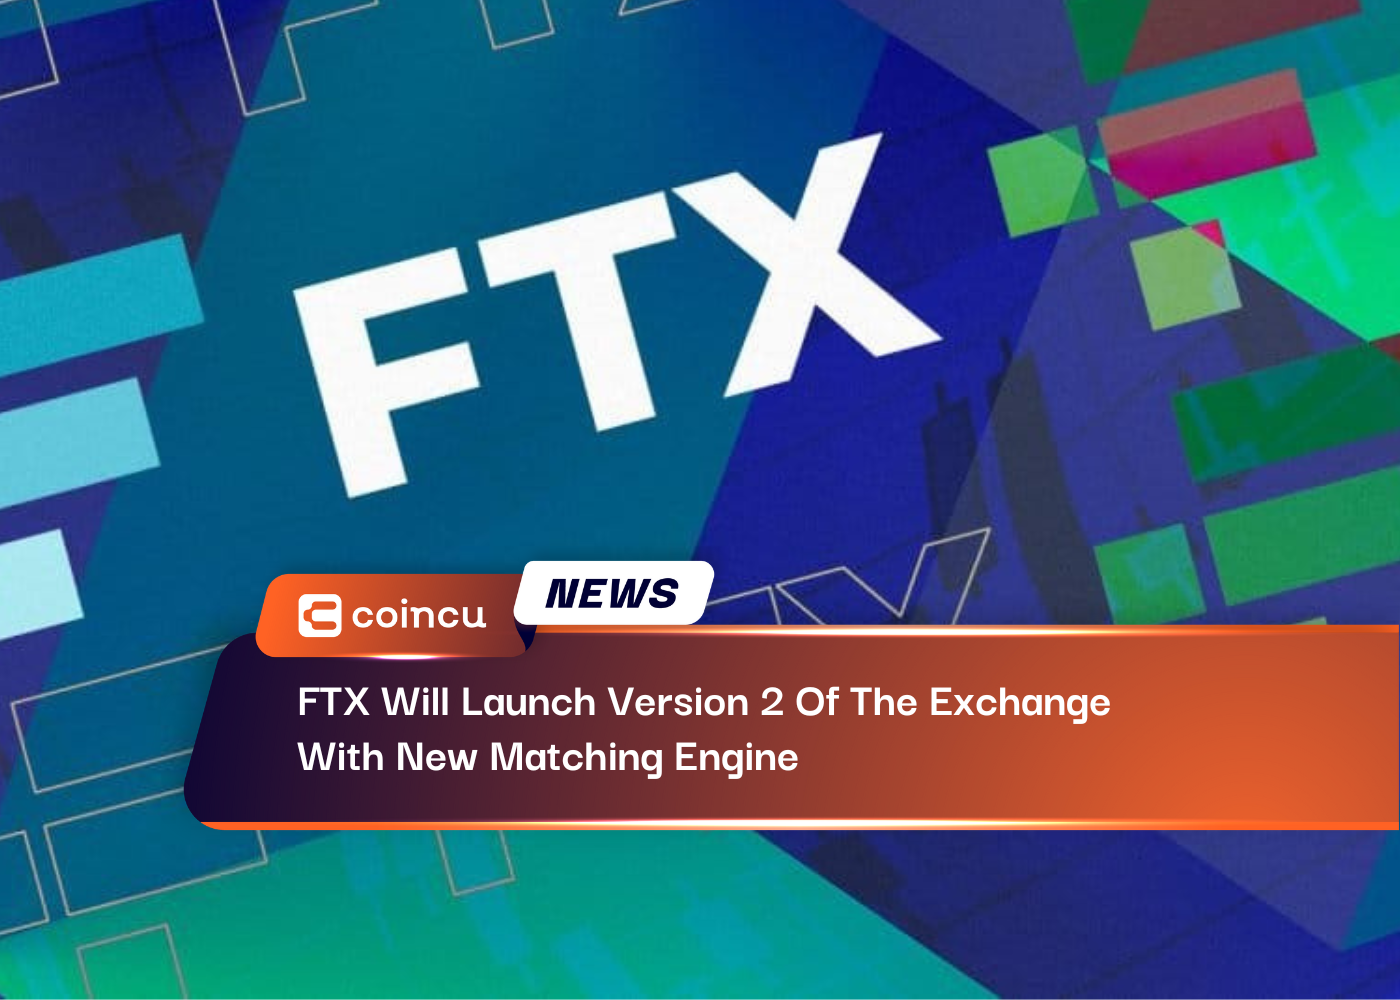 FTX Will Launch Version 2 Of The